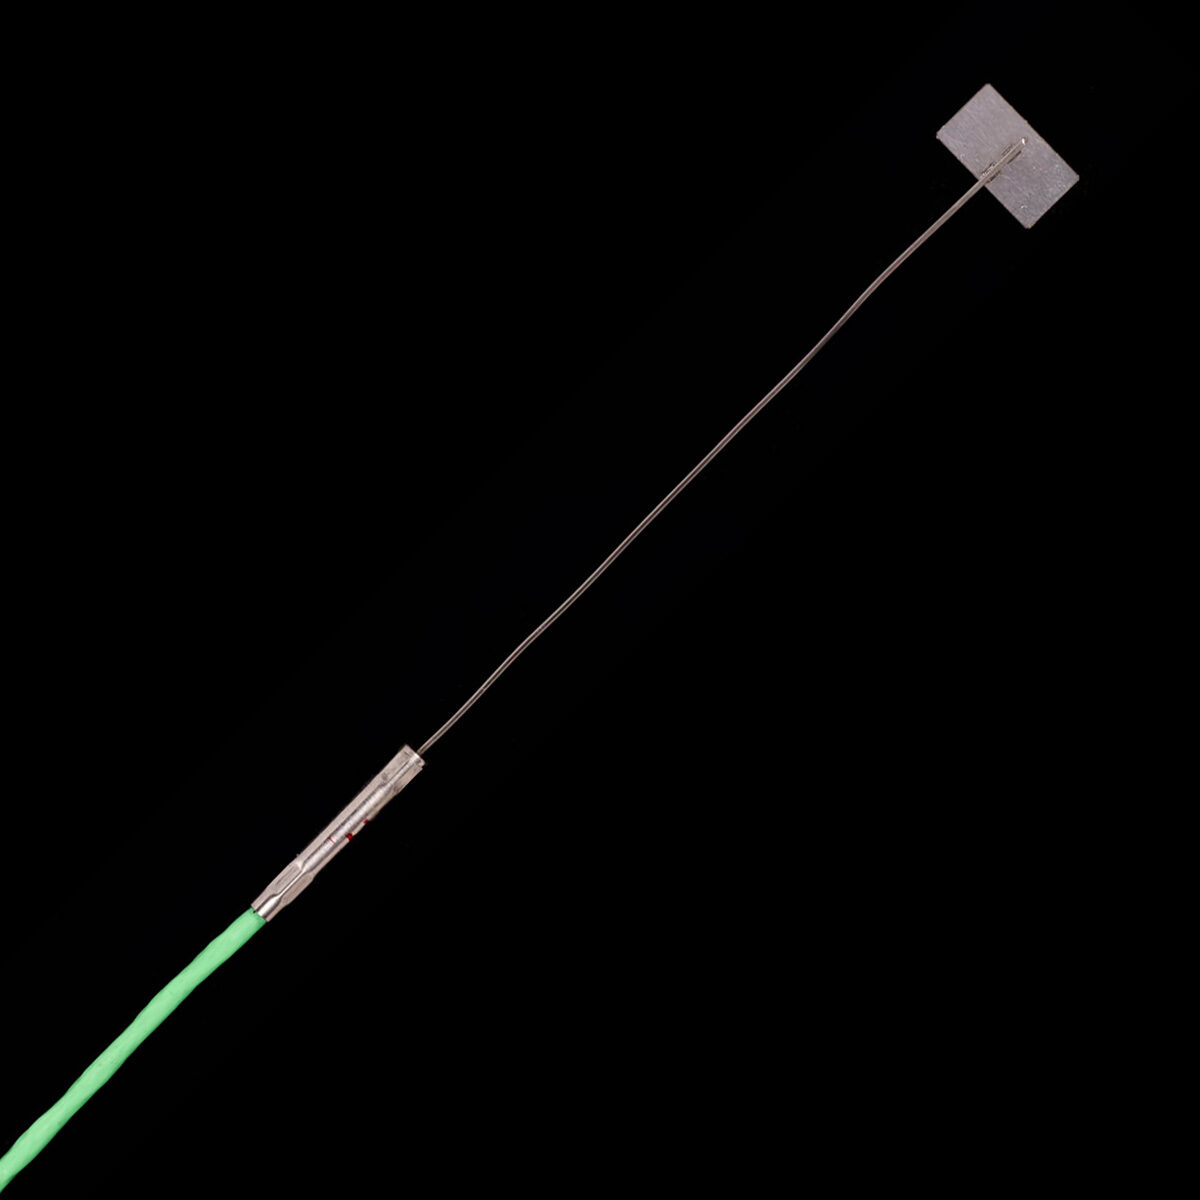 Surface thermocouple with mounting plate